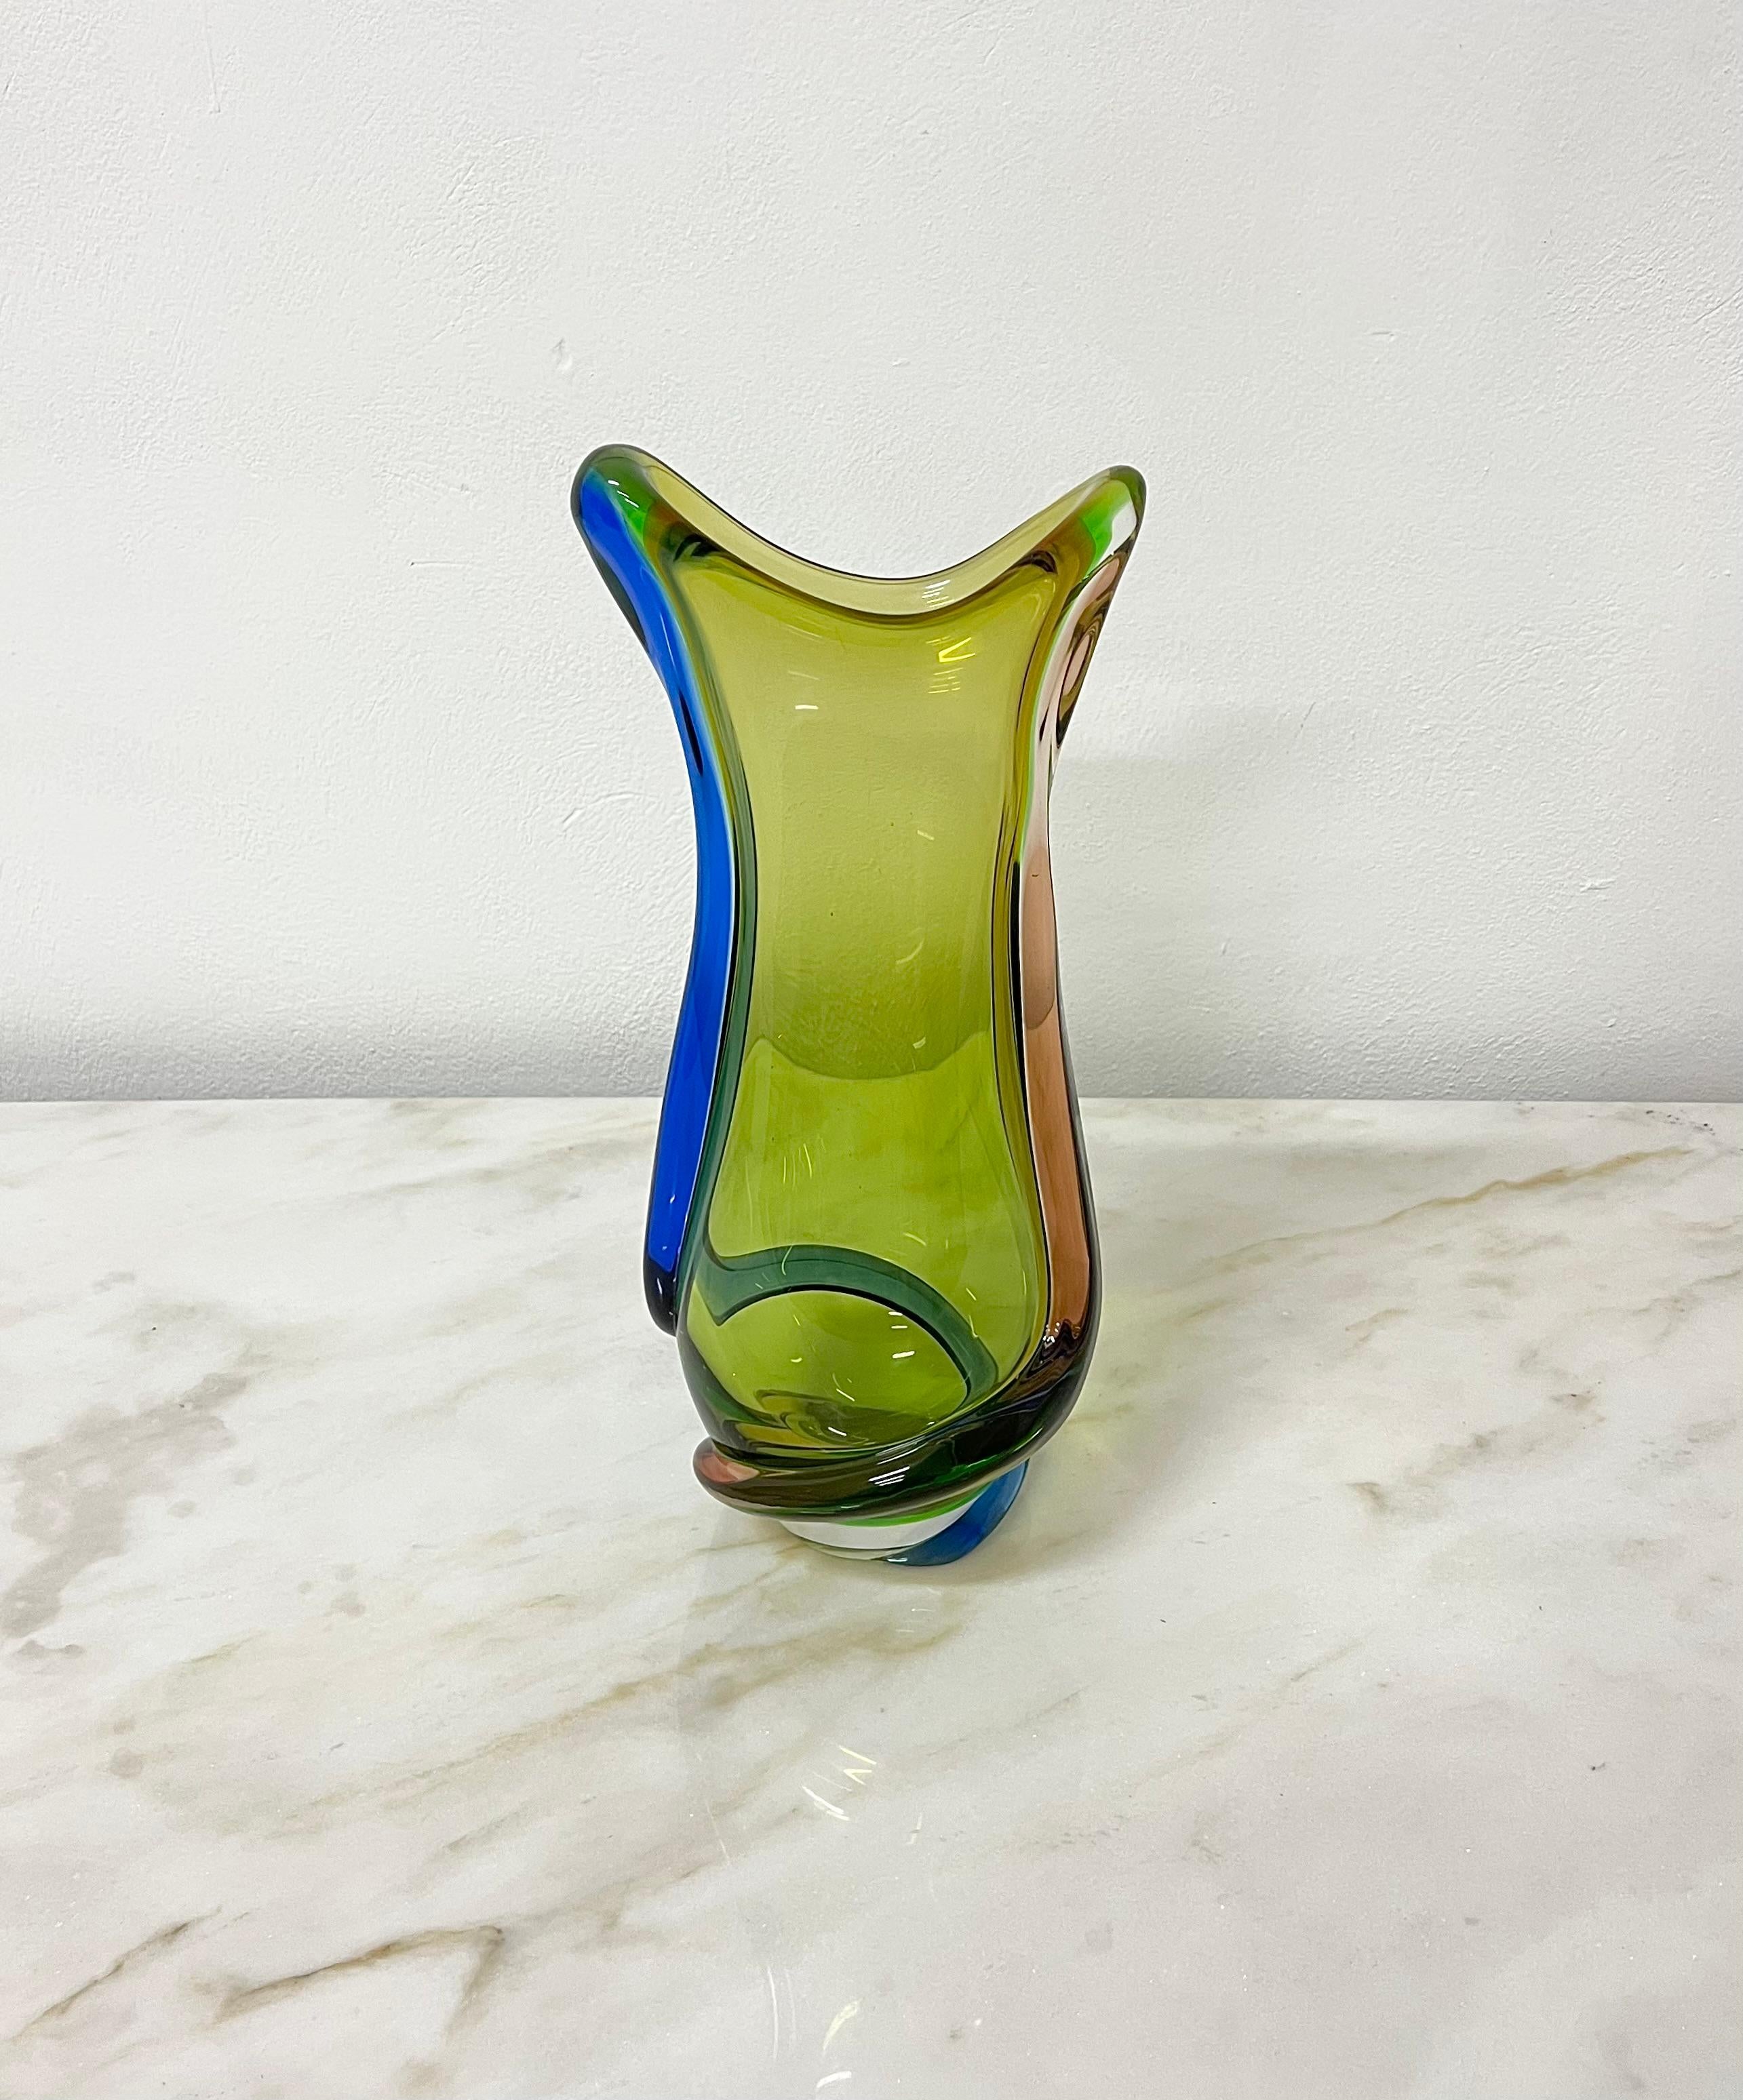 Vase Decorative Object Murano Glass Attributed to Flavio Poli Midcentury 1970s For Sale 3